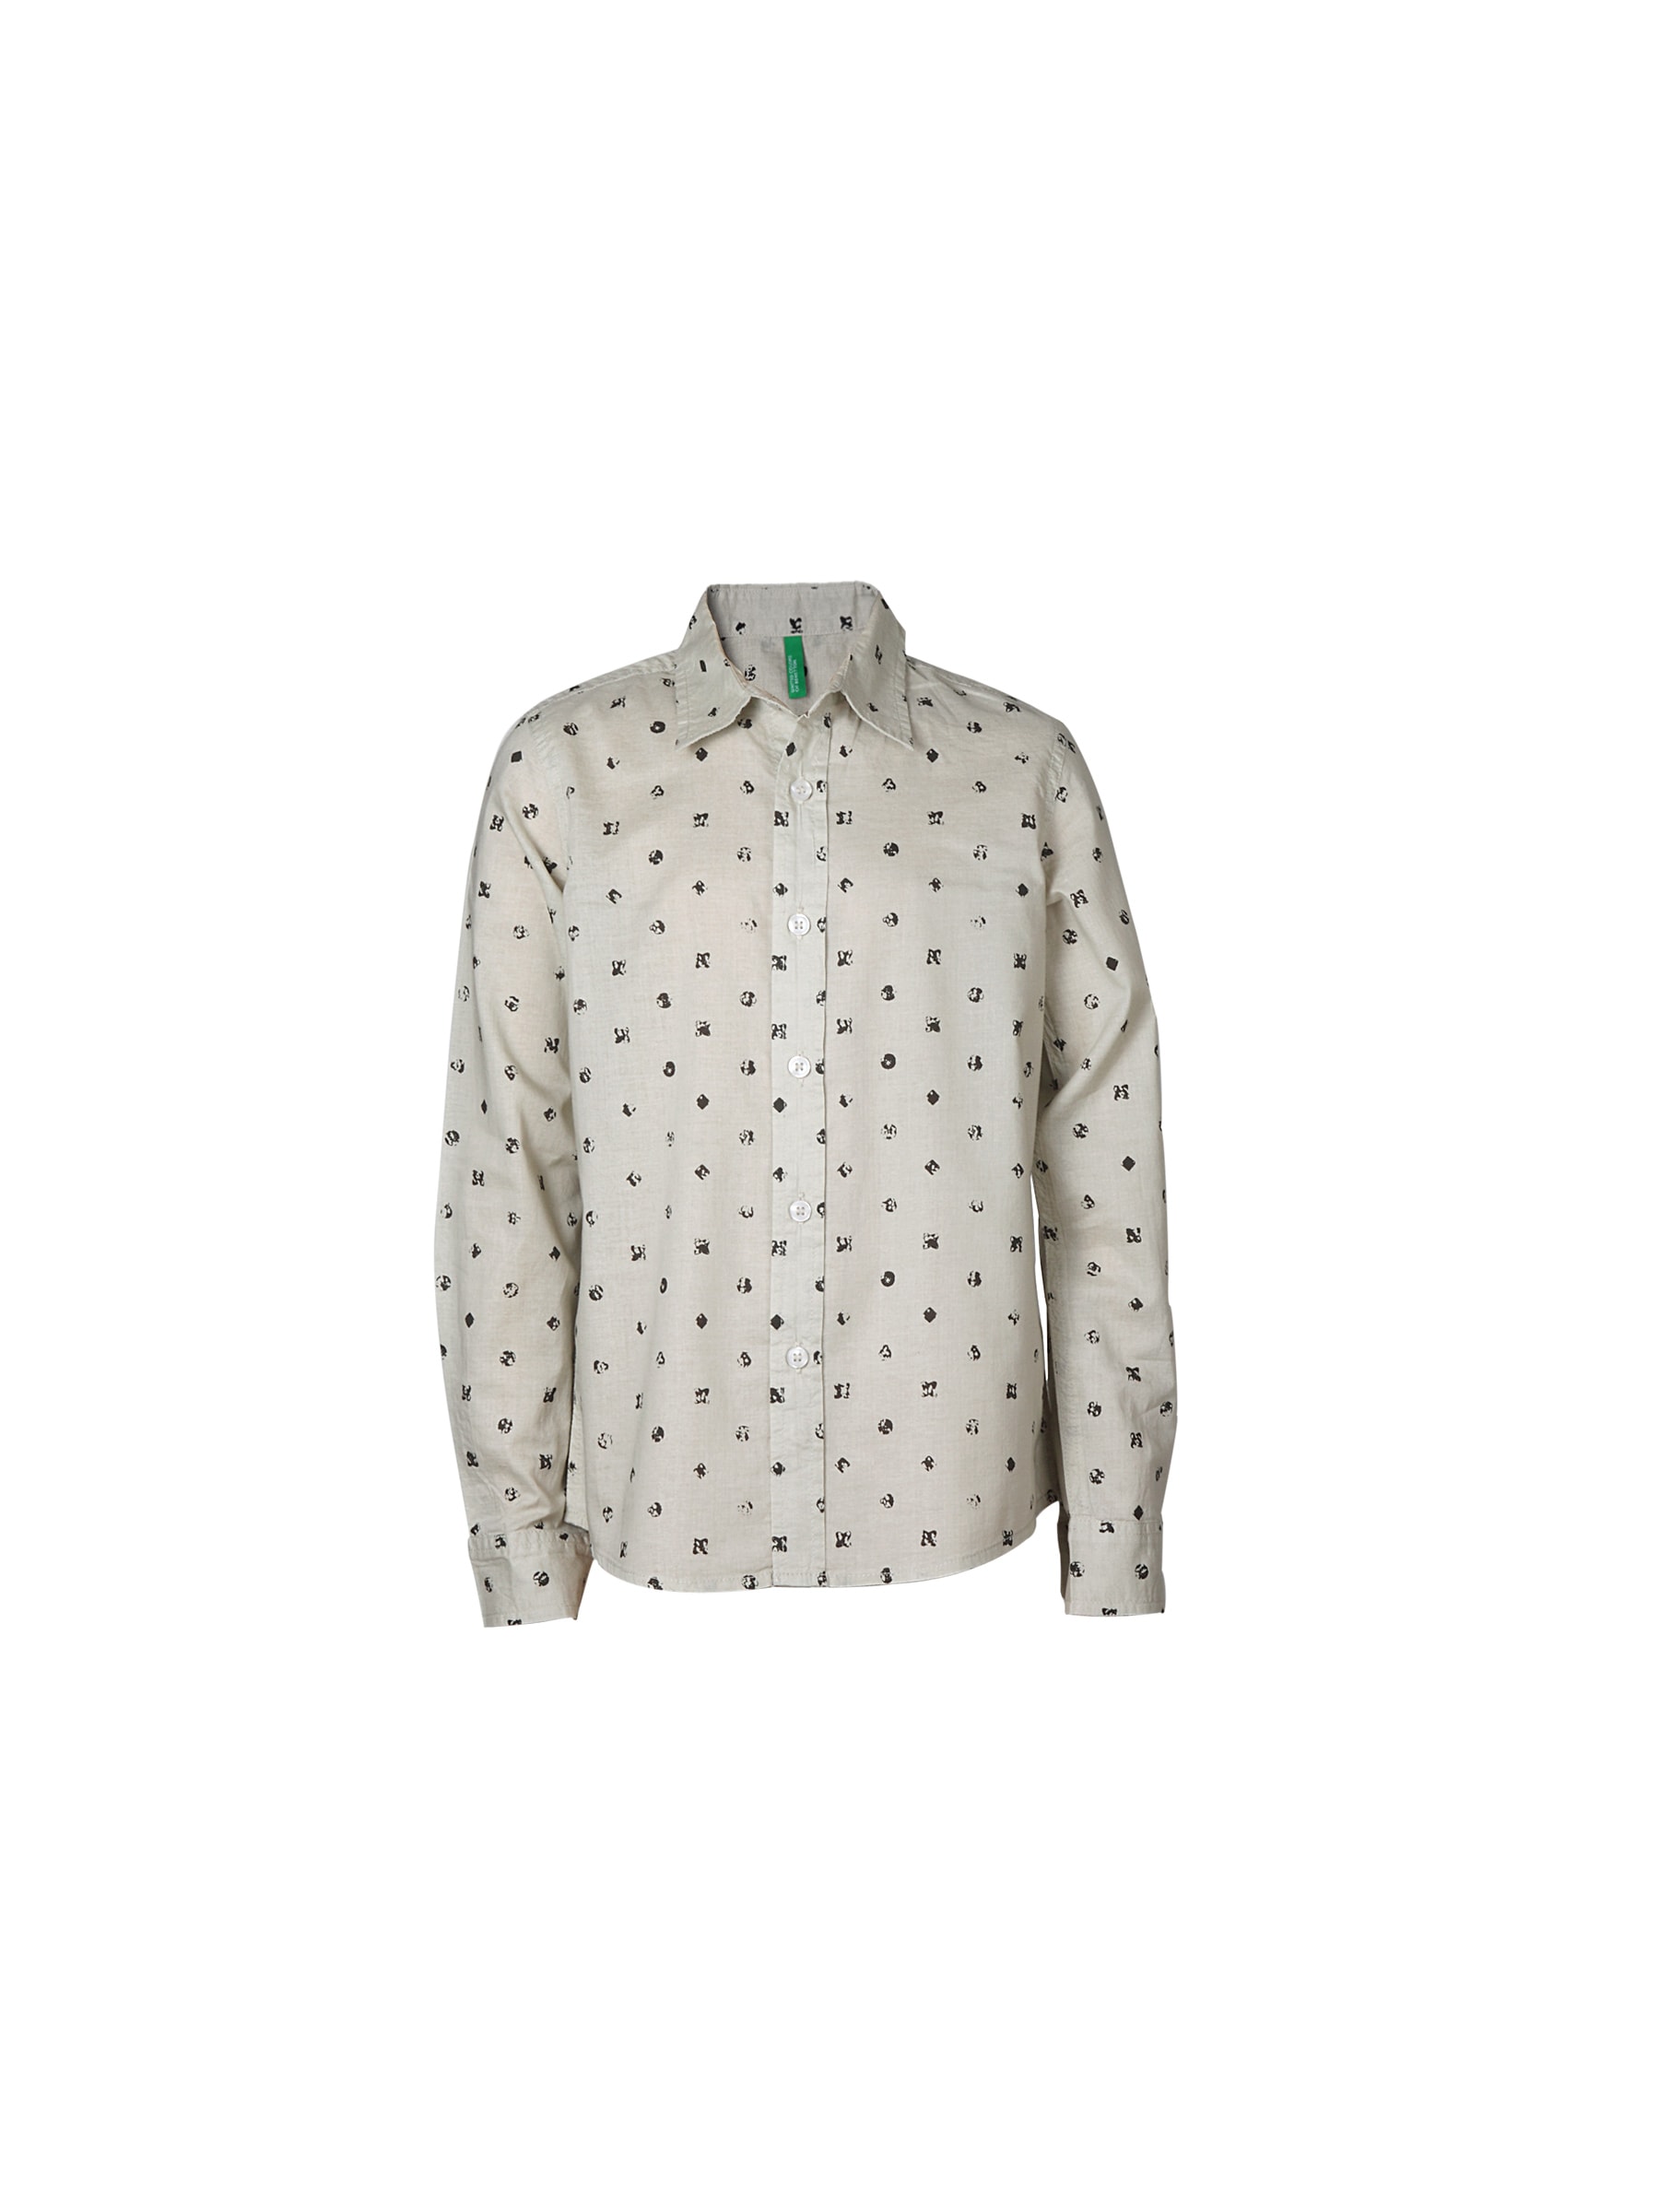 United Colors of Benetton Boys Printed White Shirt